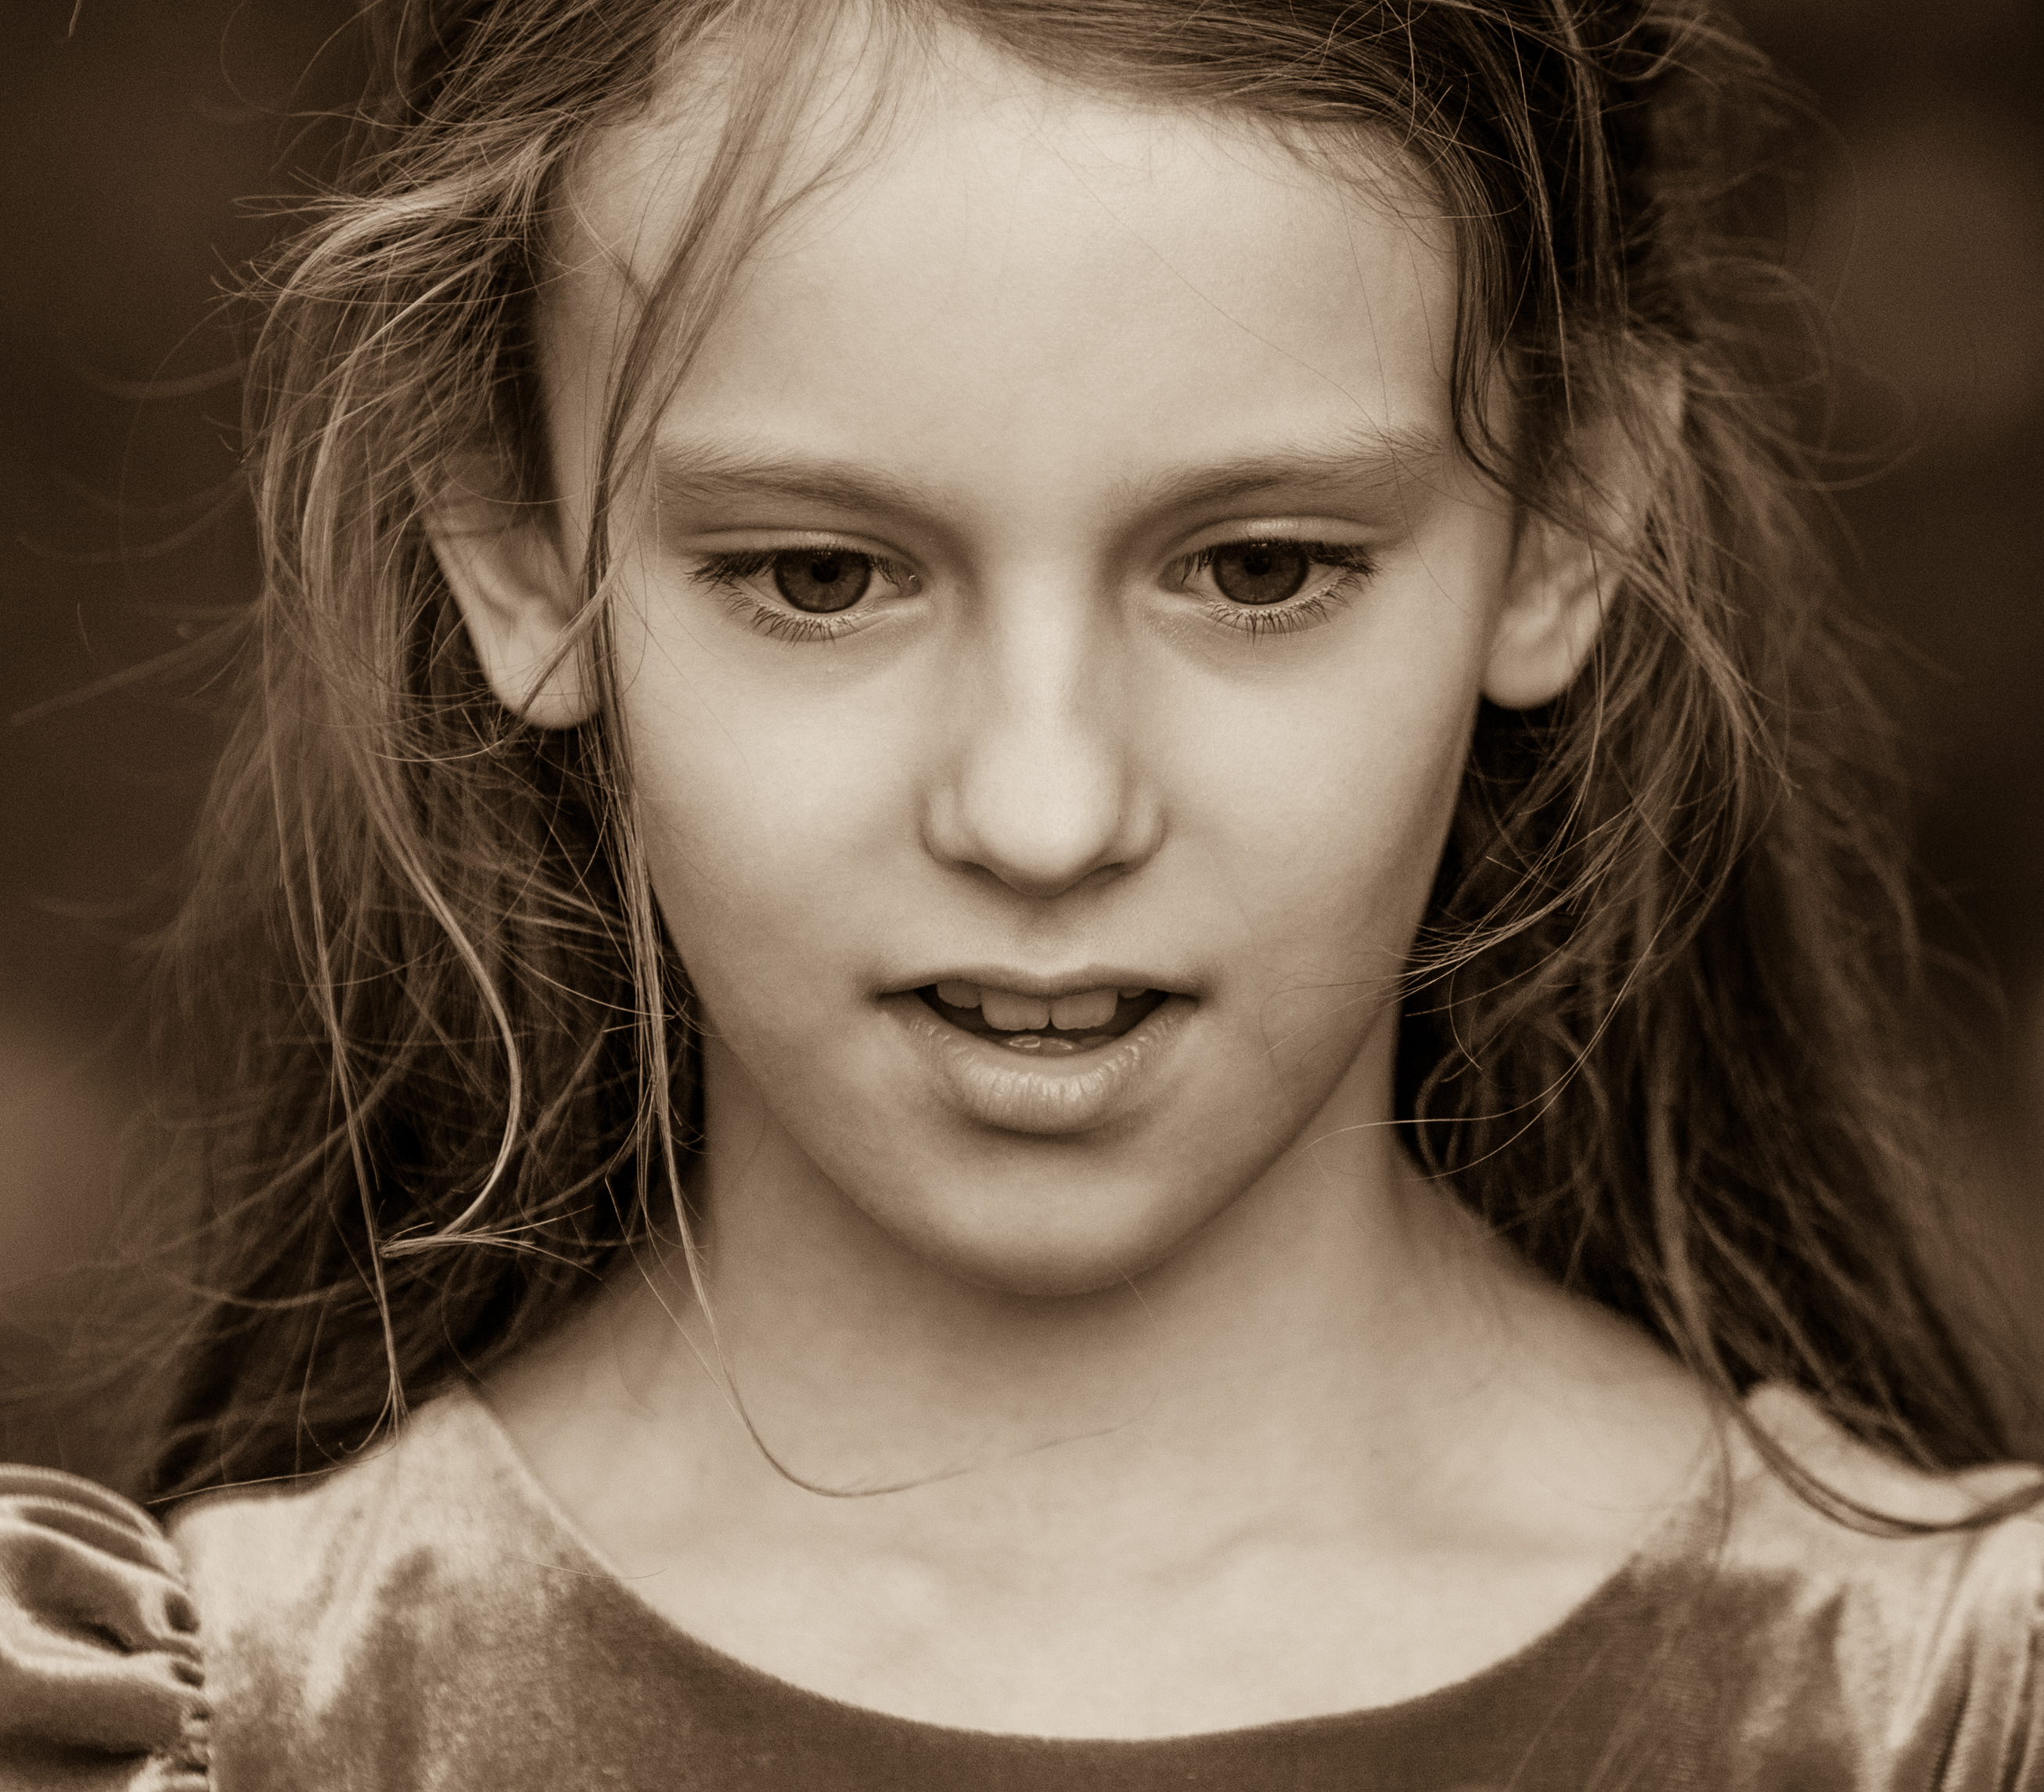 a Christian girl photographed in September 2014, picture 36, black and white